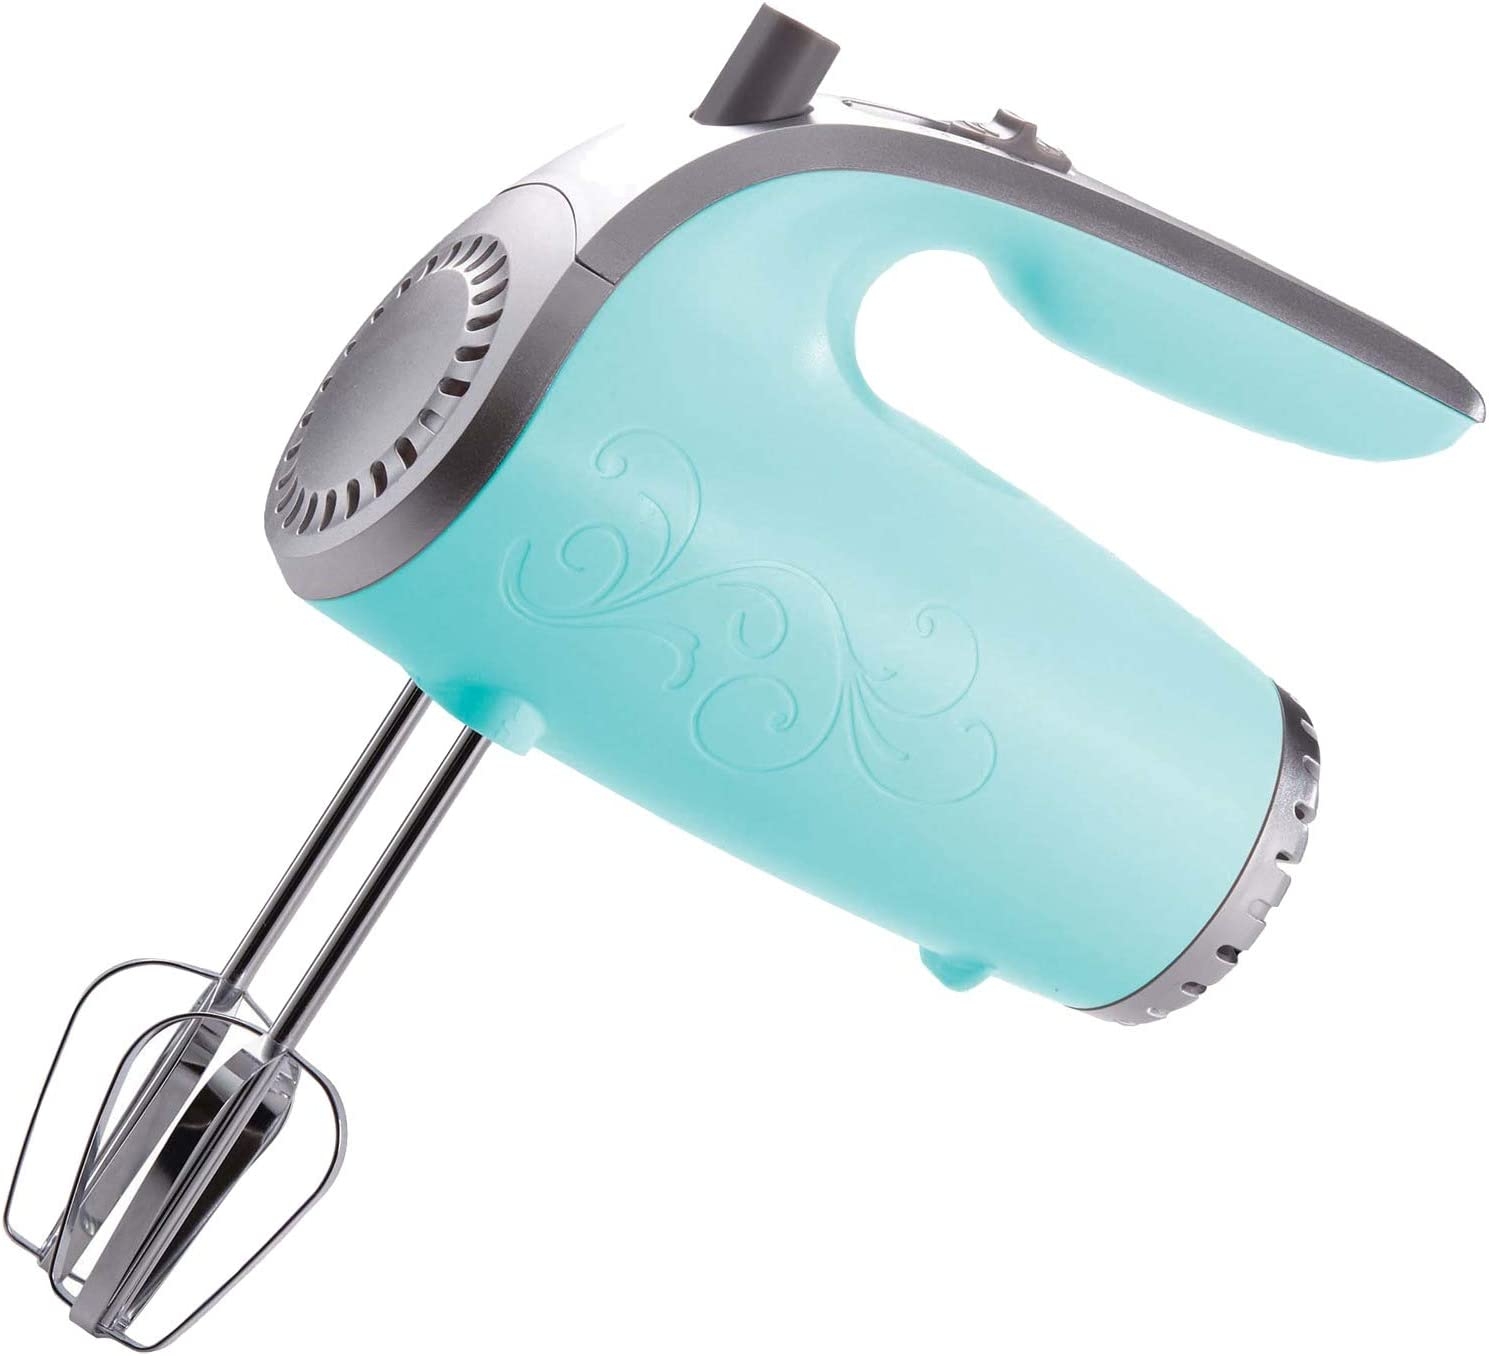 Brentwood HM-48BL Lightweight 5-Speed Electric Hand Mixer, Blue Import To Shop ×Product customization General Description